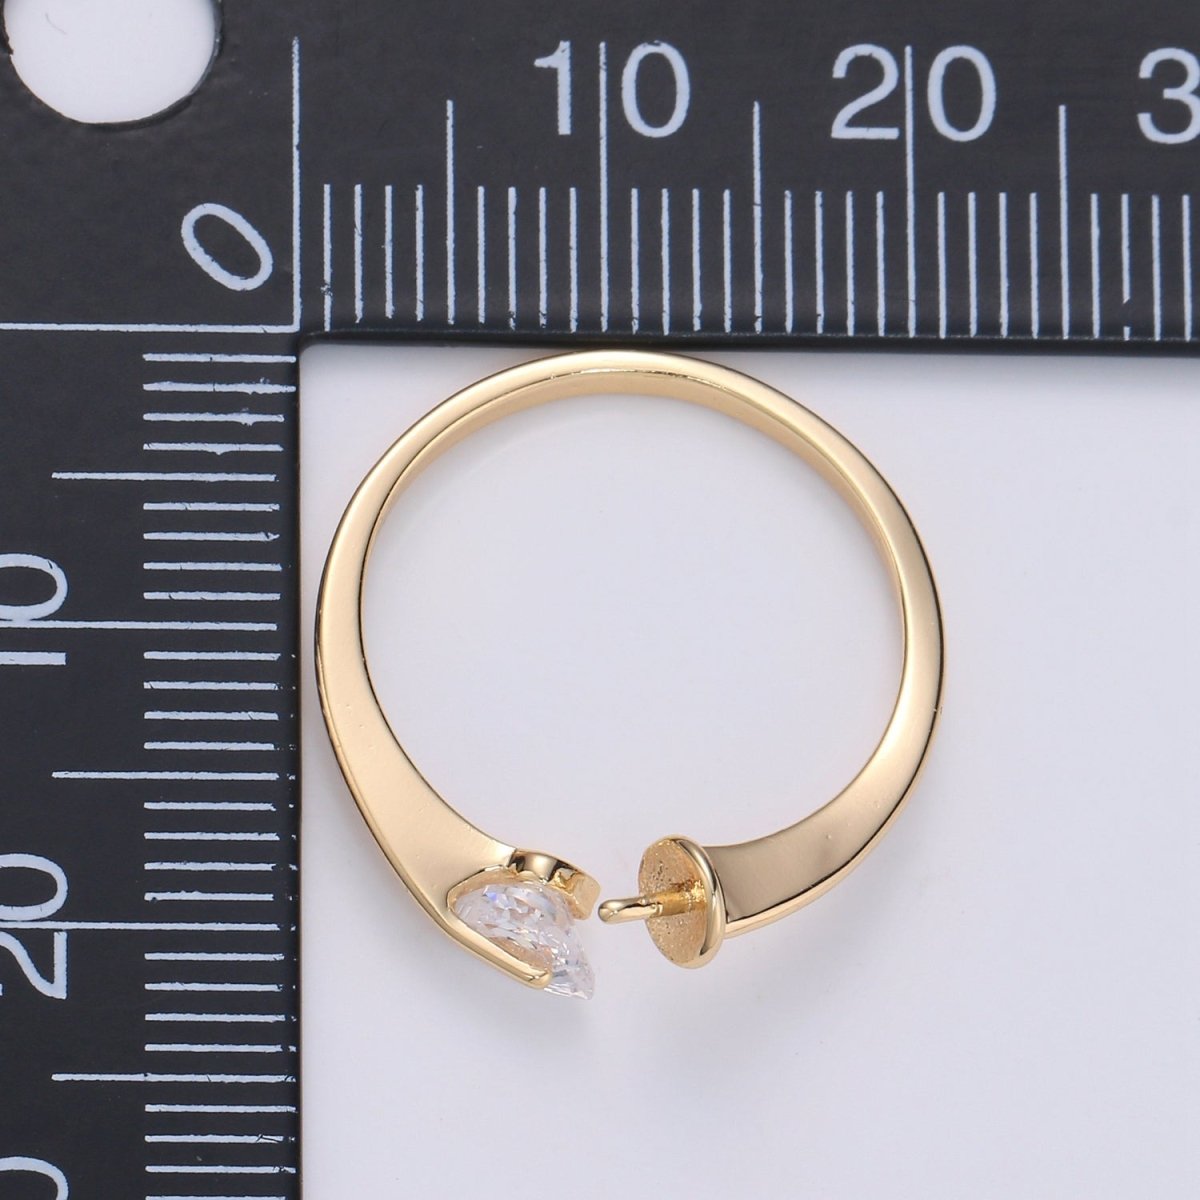 Ring Setting, Gold Ring Accessories, Pearl Ring Empty Holder, Jewelry DIY, Jewelry Making, Ring Base, Minimalist Ring Supply L010 - DLUXCA